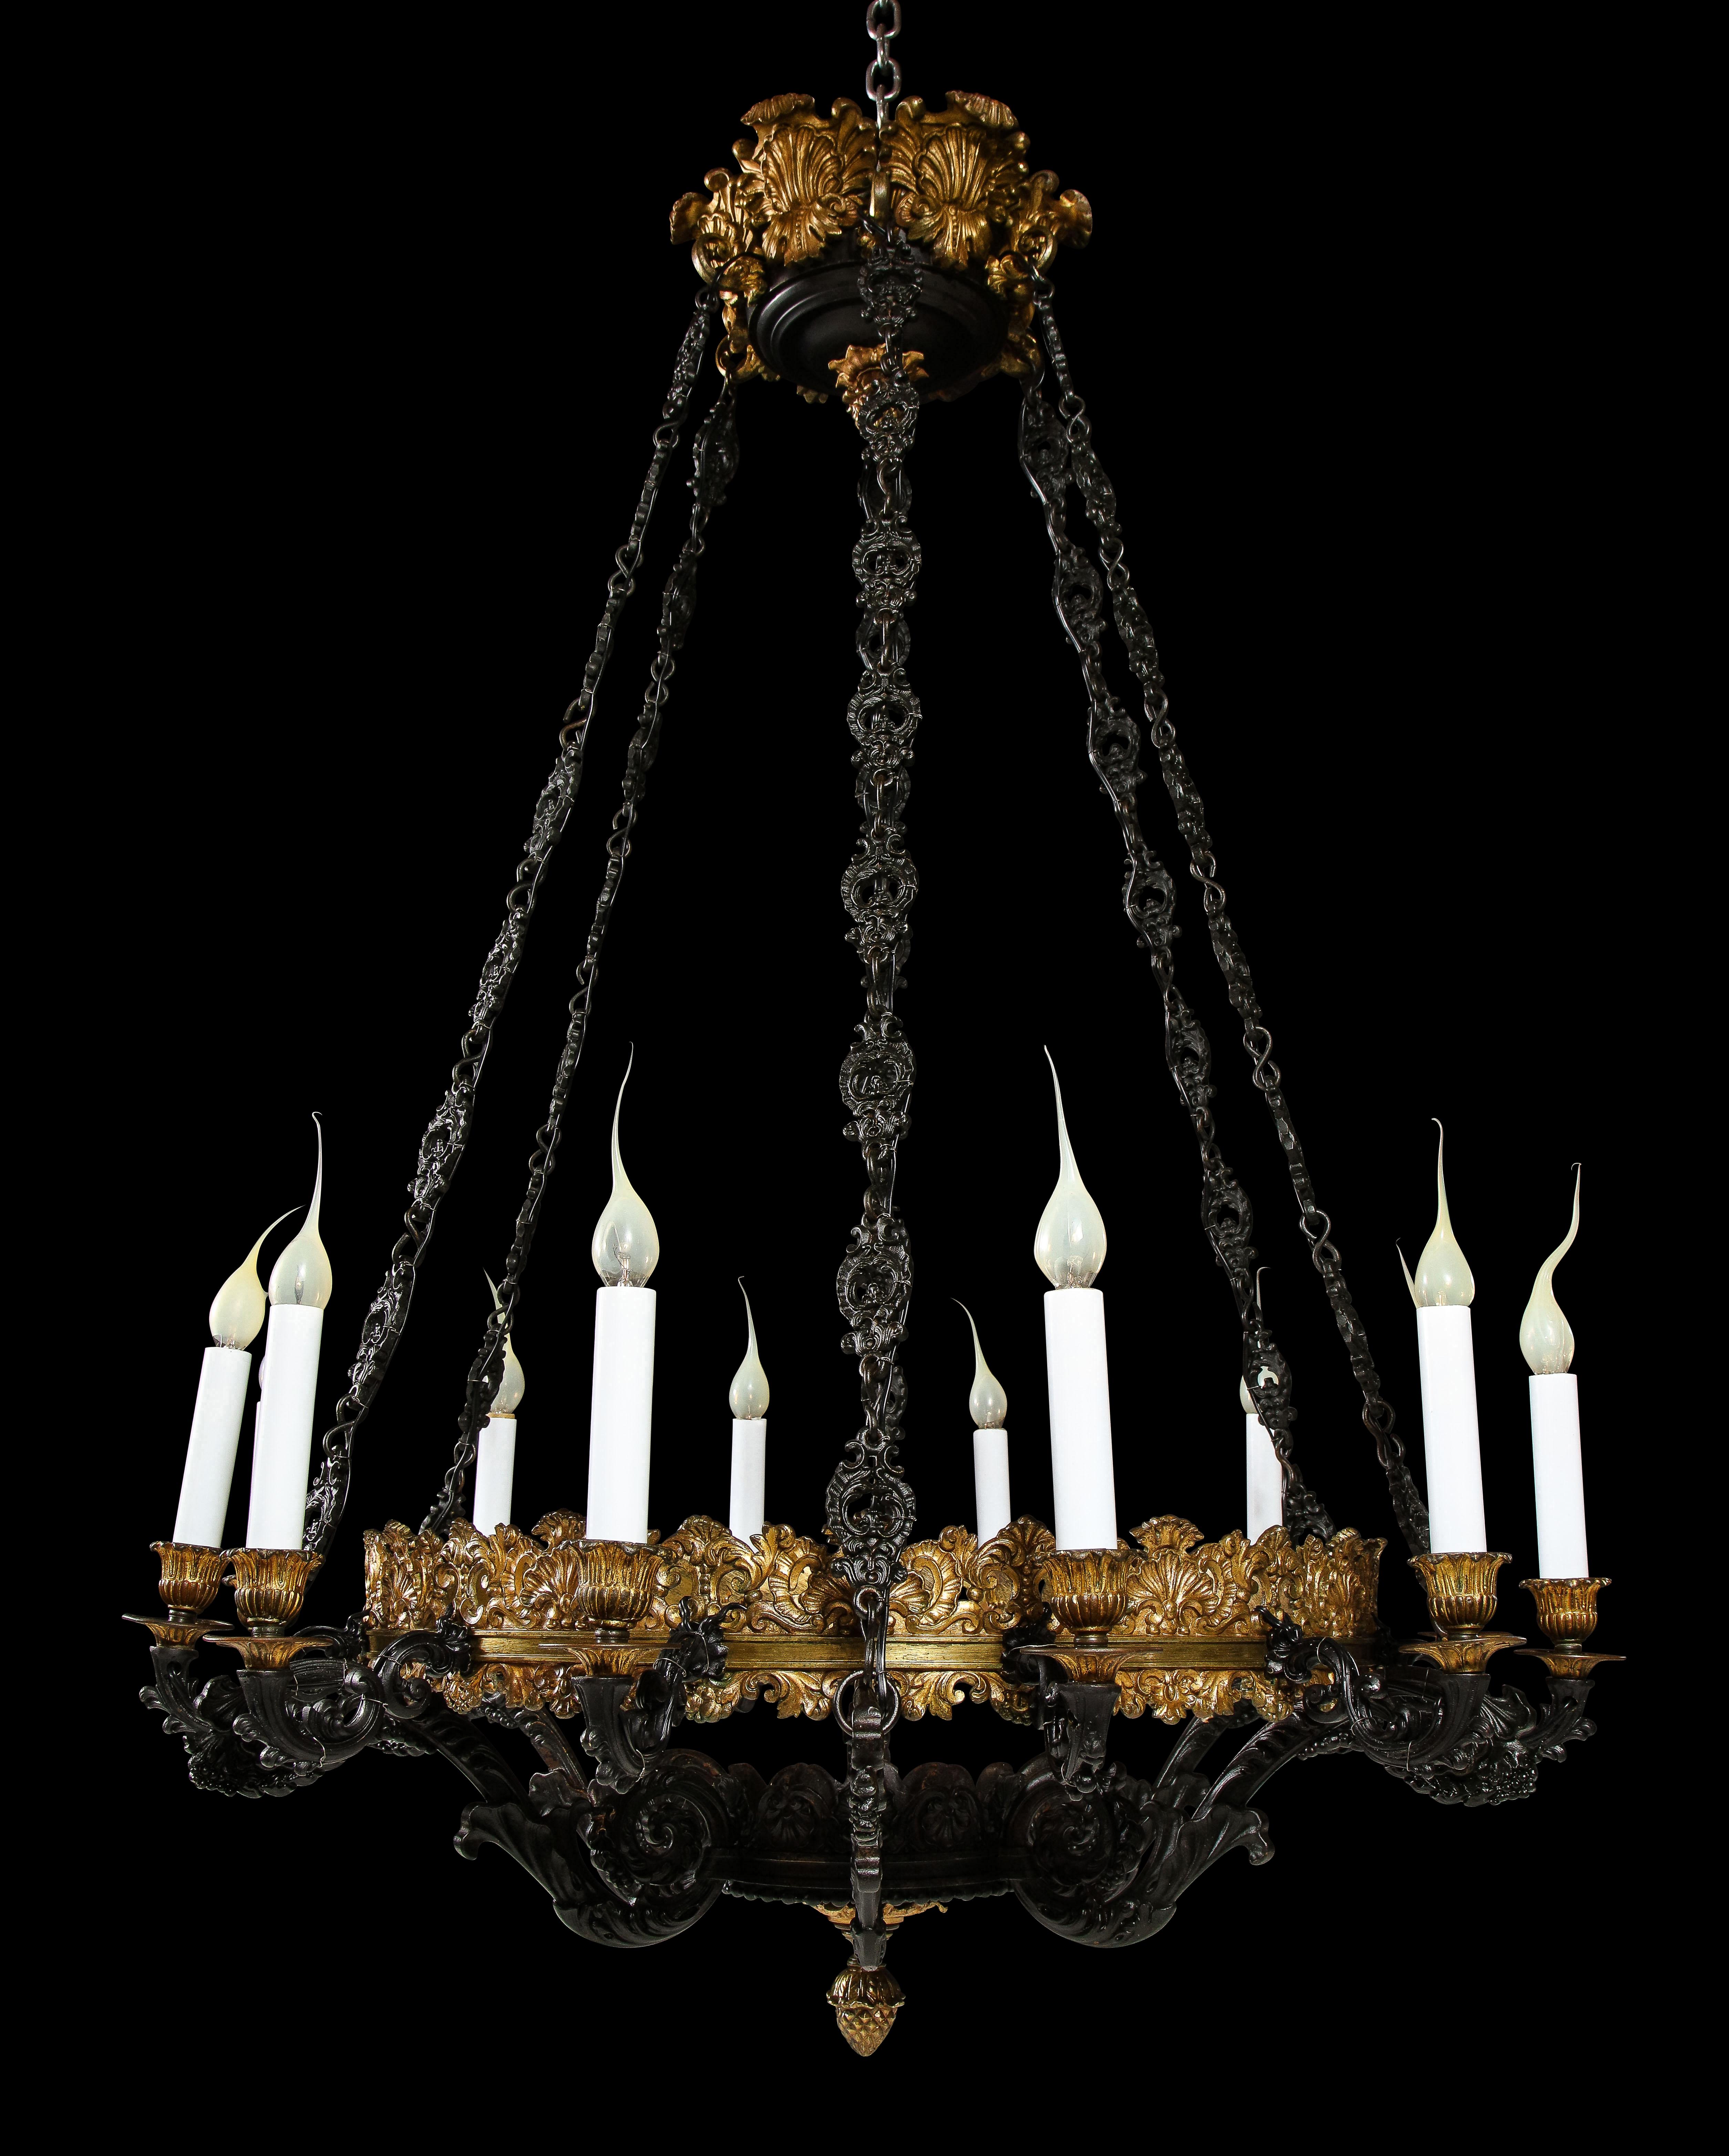 A Large and very impressive Antique French Empire style gilt bronze and patinated bronze circular form multi light chandelier of fine detail . This large unique chandelier consists of twelve patinated bronze arms embellished on a circular gilt